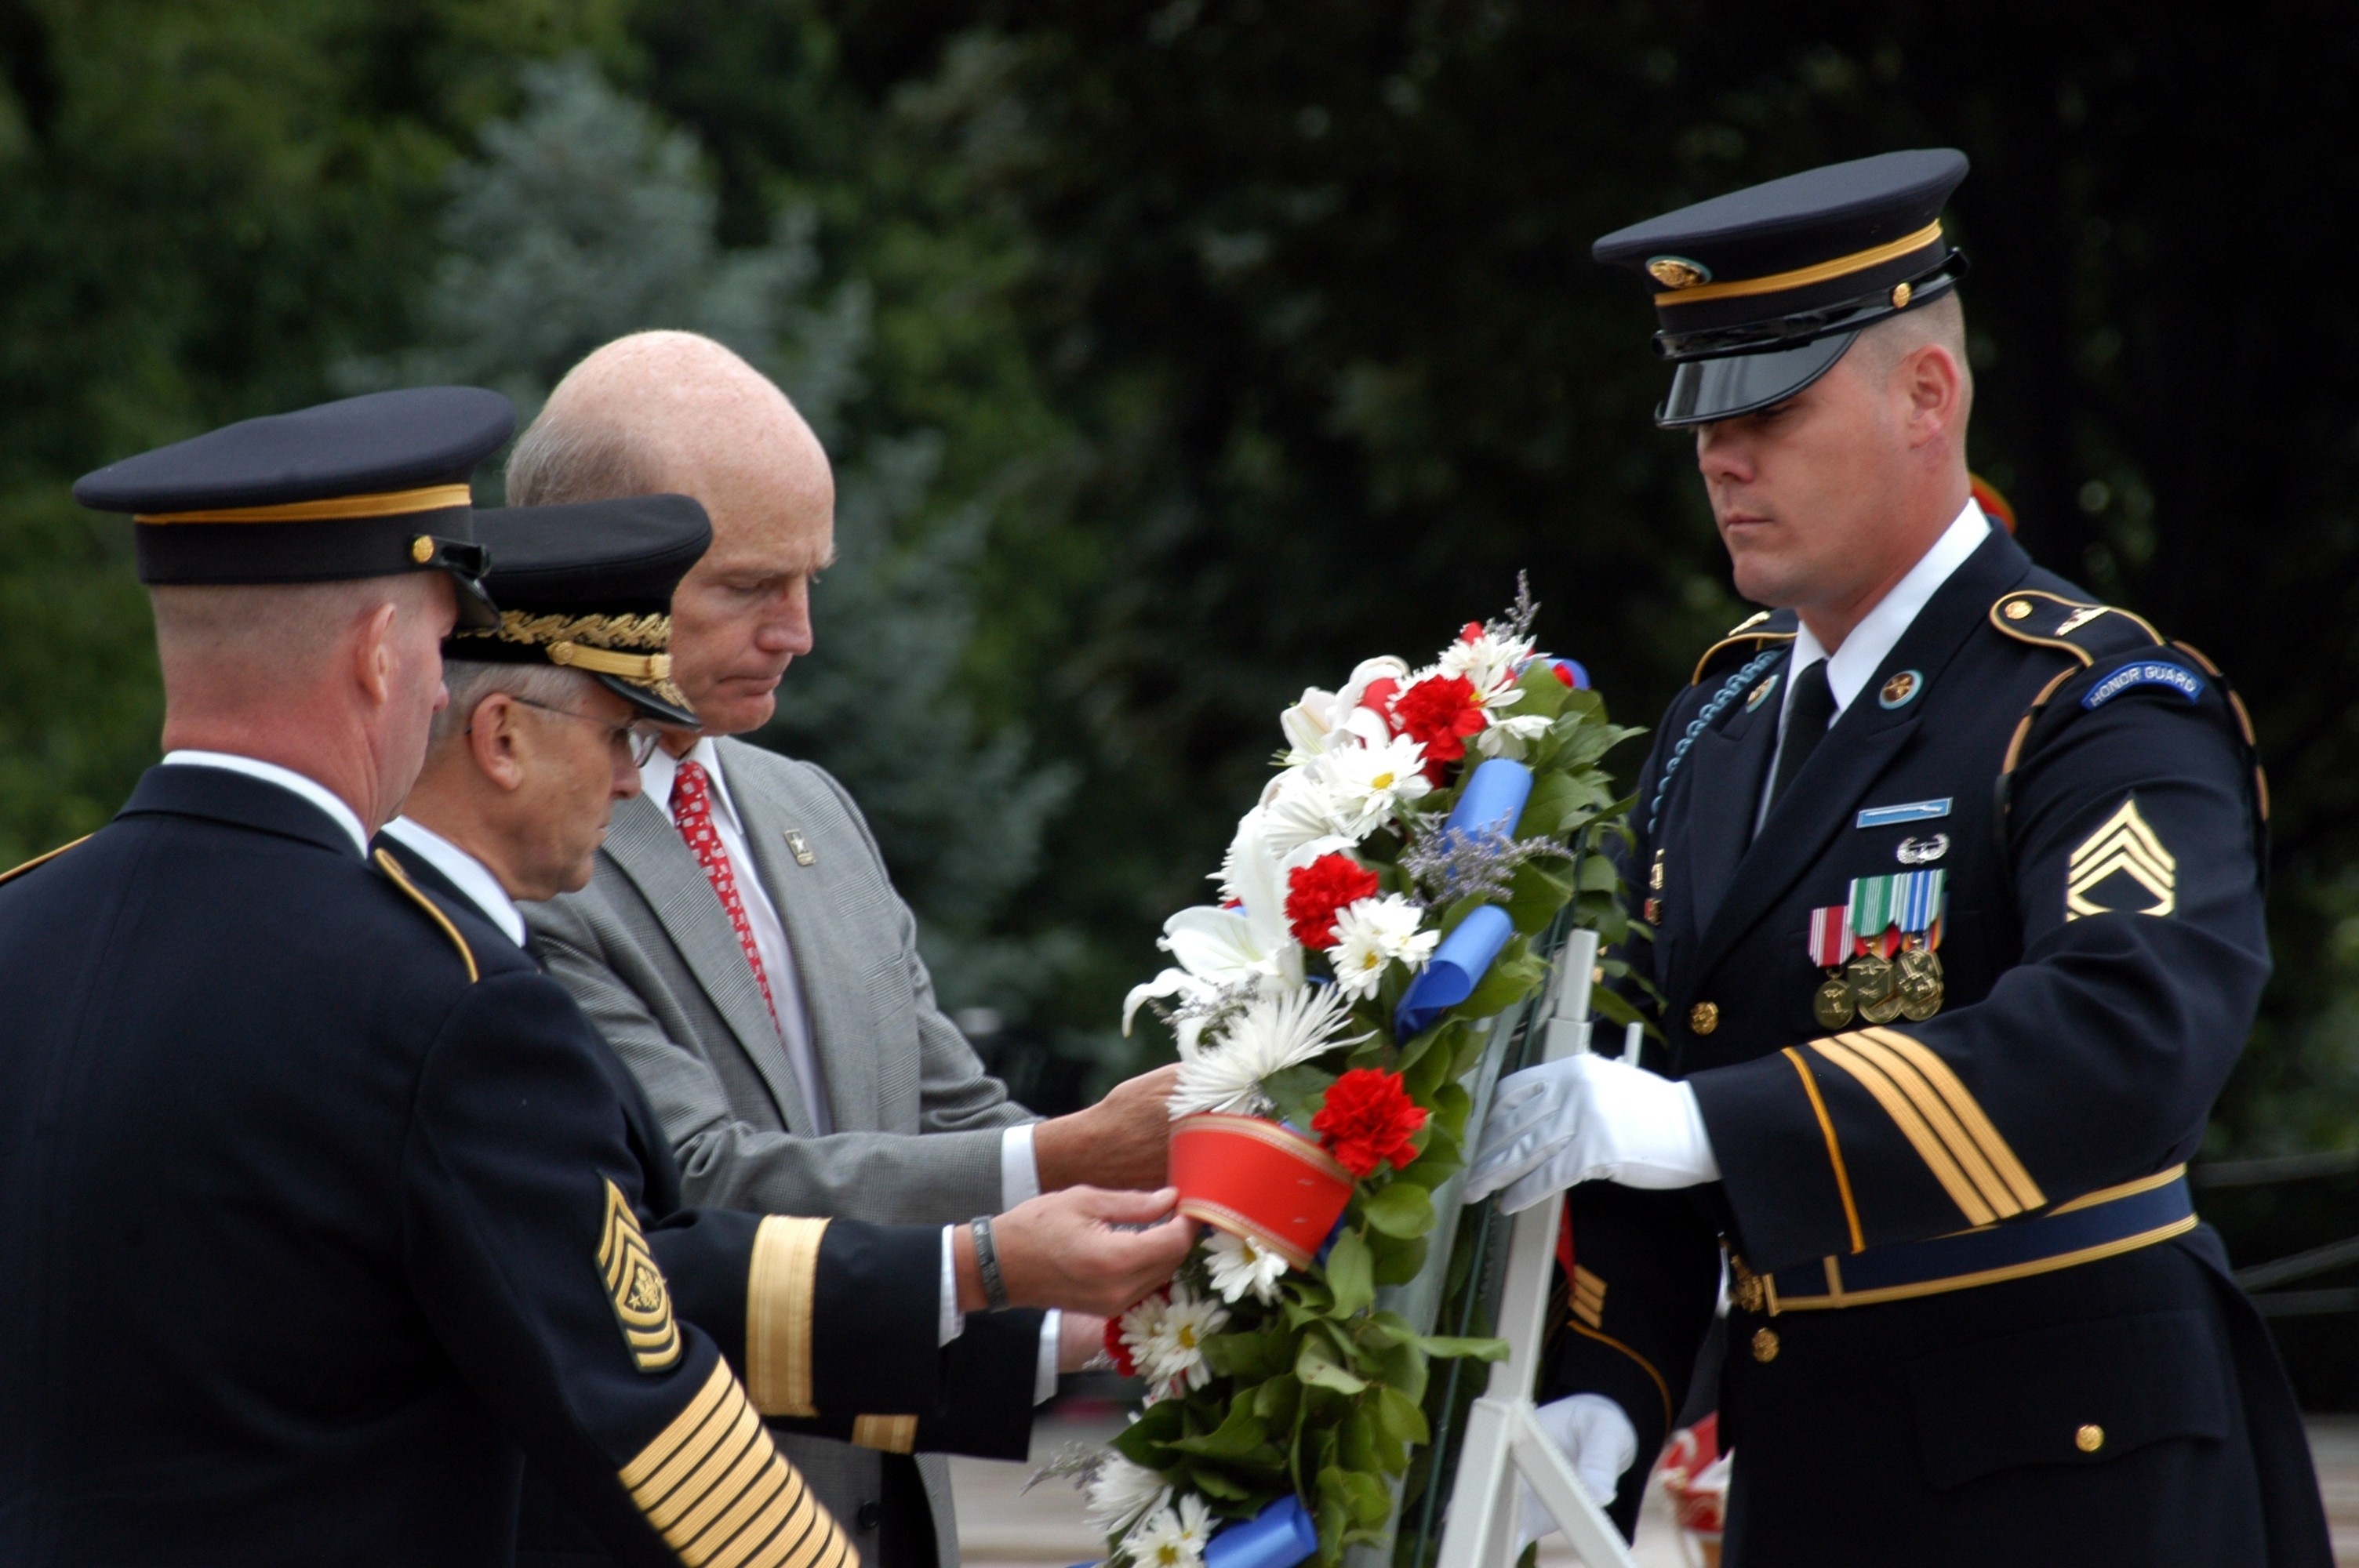 Birthday Wreath at Tomb of Unknowns | Article | The United States Army